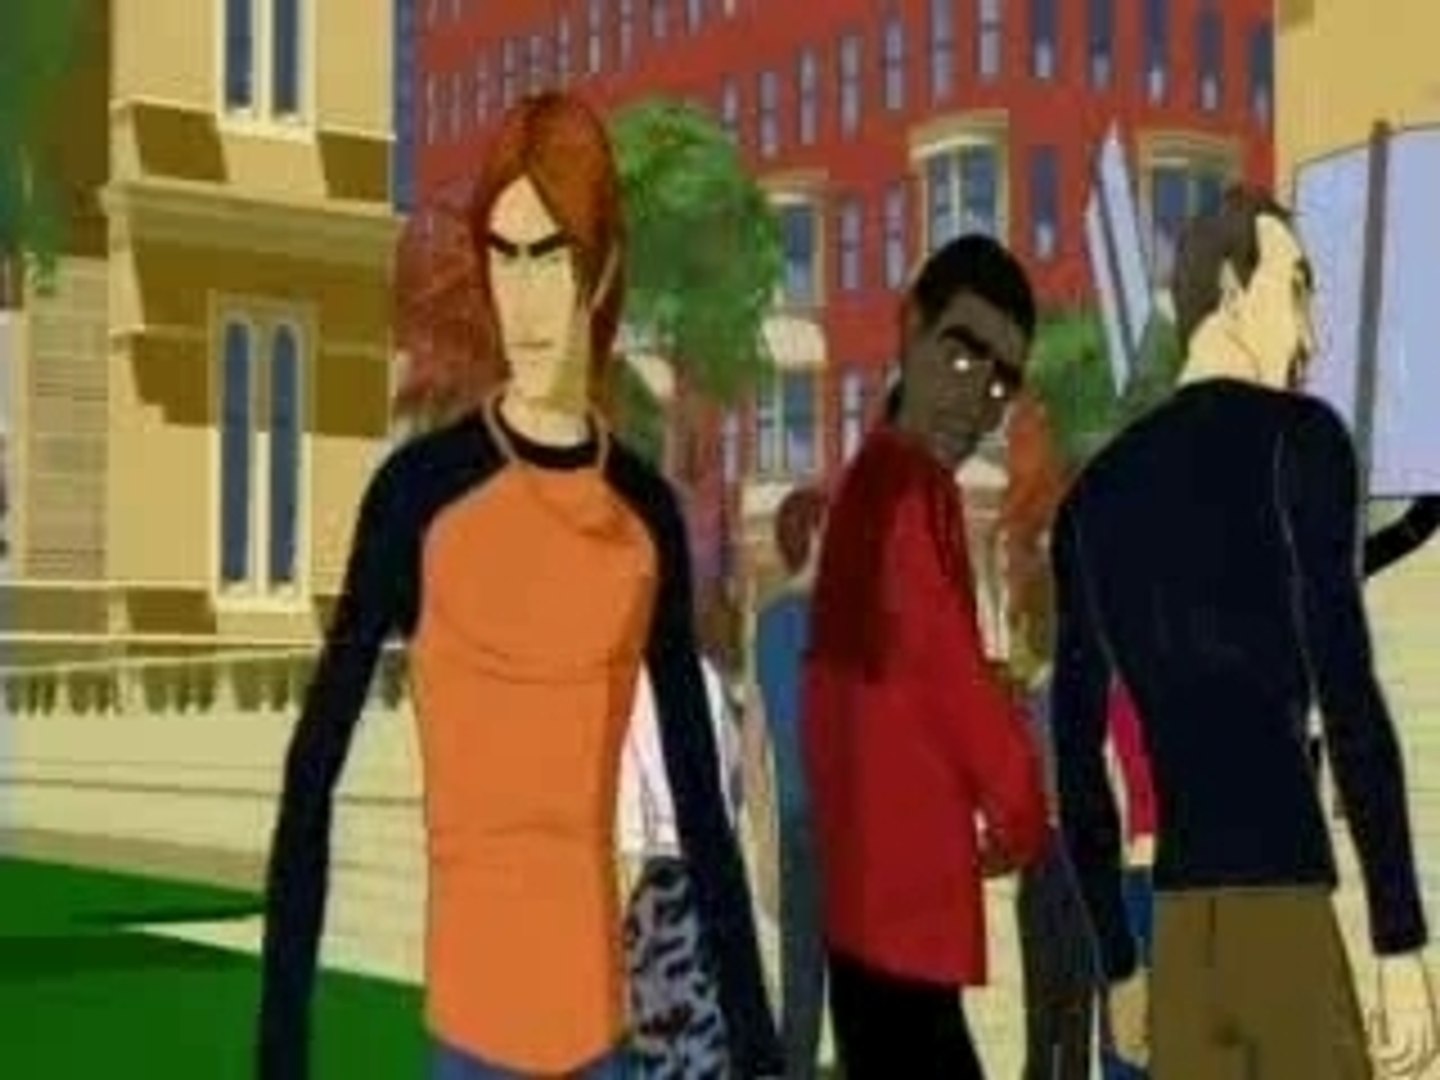 spider-man the new animated series (2003) by souptik hansda - Dailymotion